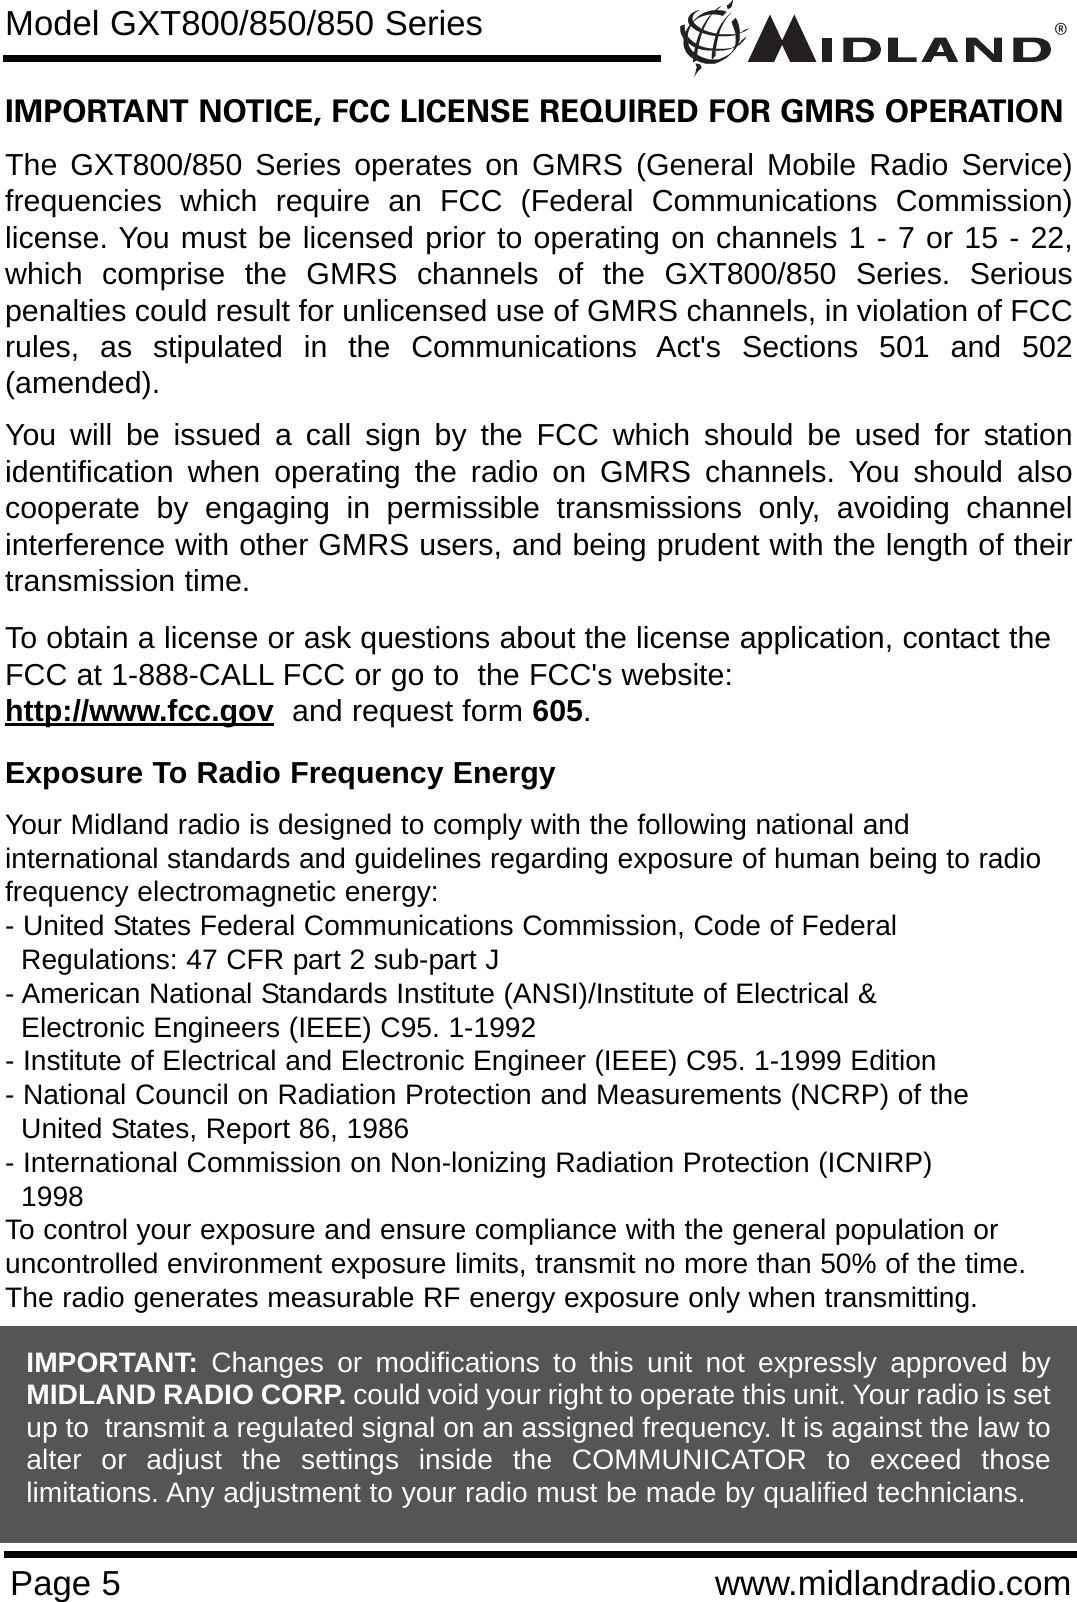 ®Page 5 www.midlandradio.comIMPORTANT NOTICE, FCC LICENSE REQUIRED FOR GMRS OPERATIONThe GXT800/850 Series operates on GMRS (General Mobile Radio Service)frequencies which require an FCC (Federal Communications Commission)license. You must be licensed prior to operating on channels 1 - 7 or 15 - 22,which comprise the GMRS channels of the GXT800/850 Series. Seriouspenalties could result for unlicensed use of GMRS channels, in violation of FCCrules, as stipulated in the Communications Act&apos;s Sections 501 and 502(amended).You will be issued a call sign by the FCC which should be used for stationidentification when operating the radio on GMRS channels. You should alsocooperate by engaging in permissible transmissions only, avoiding channelinterference with other GMRS users, and being prudent with the length of theirtransmission time.To obtain a license or ask questions about the license application, contact theFCC at 1-888-CALL FCC or go to  the FCC&apos;s website:  http://www.fcc.gov and request form 605.Exposure To Radio Frequency EnergyYour Midland radio is designed to comply with the following national and international standards and guidelines regarding exposure of human being to radiofrequency electromagnetic energy:- United States Federal Communications Commission, Code of Federal Regulations: 47 CFR part 2 sub-part J- American National Standards Institute (ANSI)/Institute of Electrical &amp; Electronic Engineers (IEEE) C95. 1-1992- Institute of Electrical and Electronic Engineer (IEEE) C95. 1-1999 Edition- National Council on Radiation Protection and Measurements (NCRP) of the United States, Report 86, 1986- International Commission on Non-lonizing Radiation Protection (ICNIRP) 1998To control your exposure and ensure compliance with the general population oruncontrolled environment exposure limits, transmit no more than 50% of the time.The radio generates measurable RF energy exposure only when transmitting.Model GXT800/850/850 SeriesIMPORTANT: Changes or modifications to this unit not expressly approved byMIDLAND RADIO CORP. could void your right to operate this unit. Your radio is setup to  transmit a regulated signal on an assigned frequency. It is against the law toalter or adjust the settings inside the COMMUNICATOR to exceed thoselimitations. Any adjustment to your radio must be made by qualified technicians.